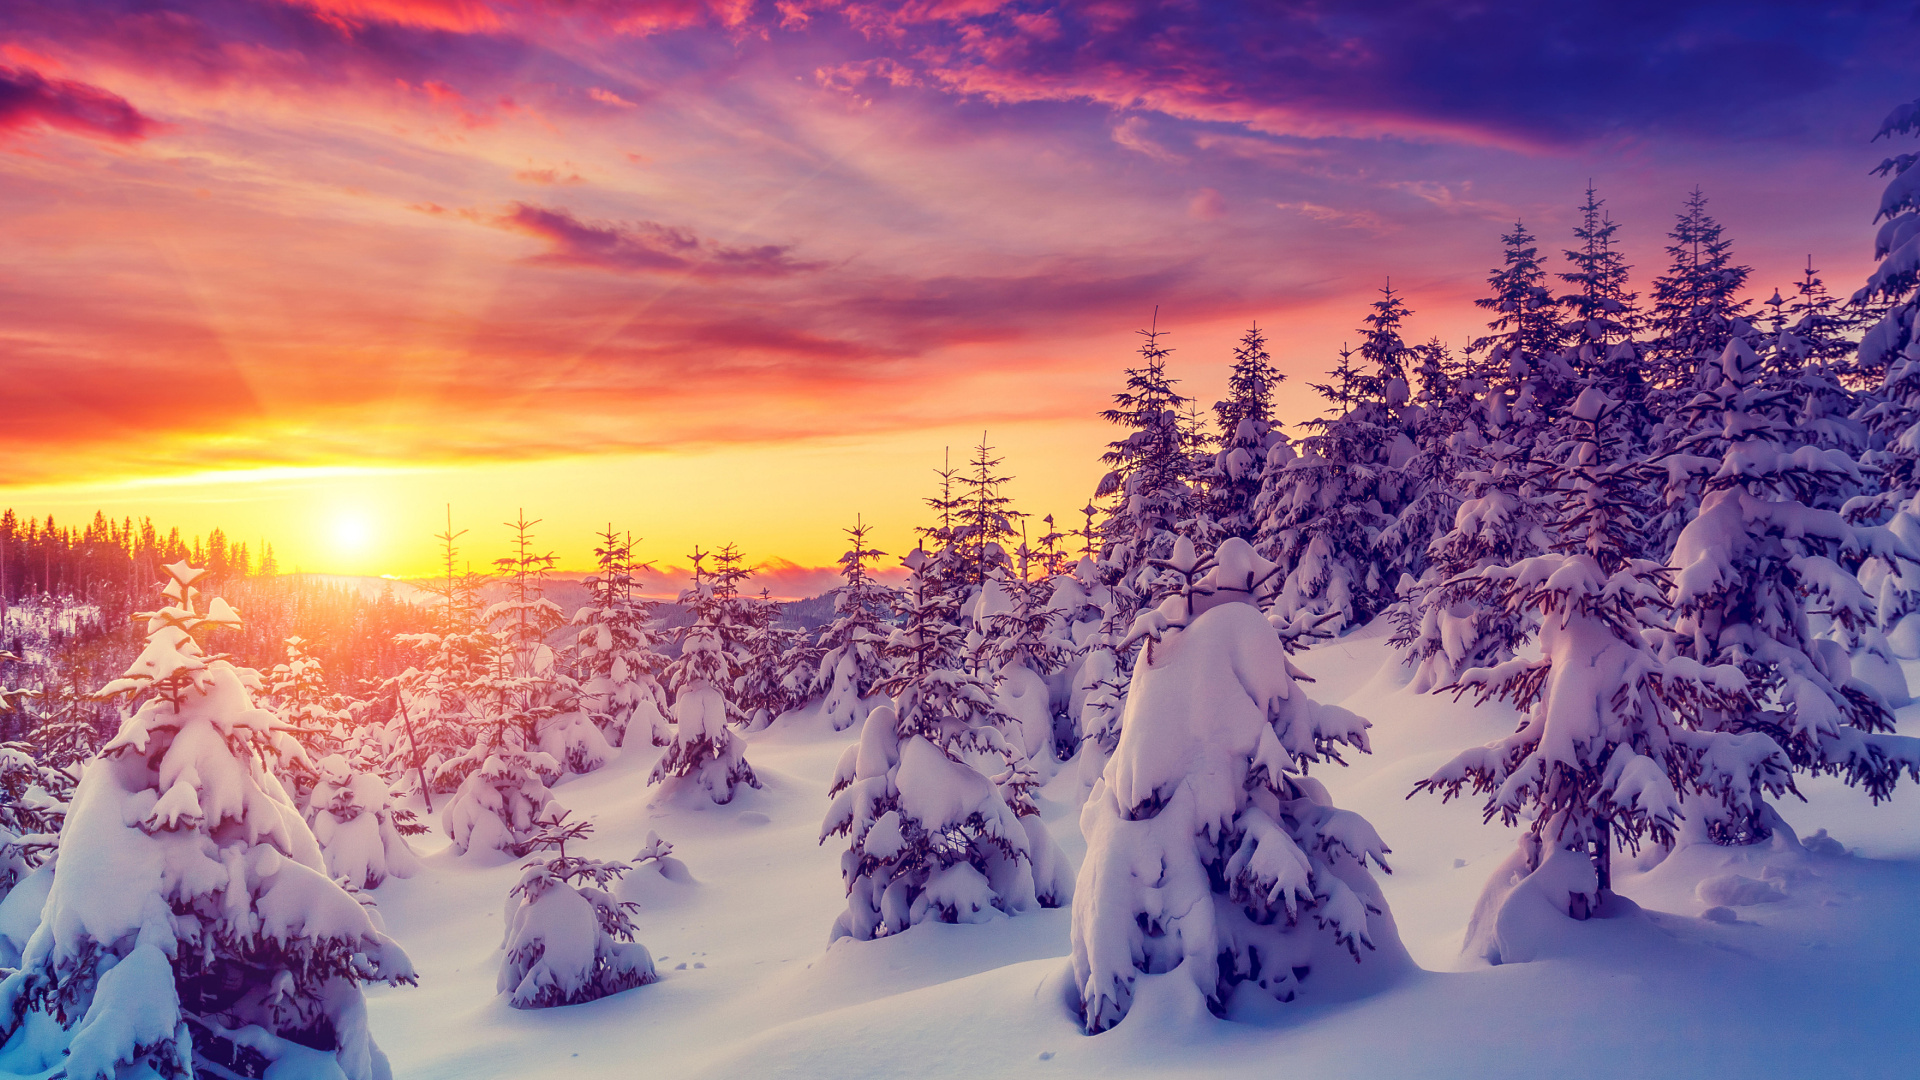 Snow Covered Trees During Sunset. Wallpaper in 1920x1080 Resolution